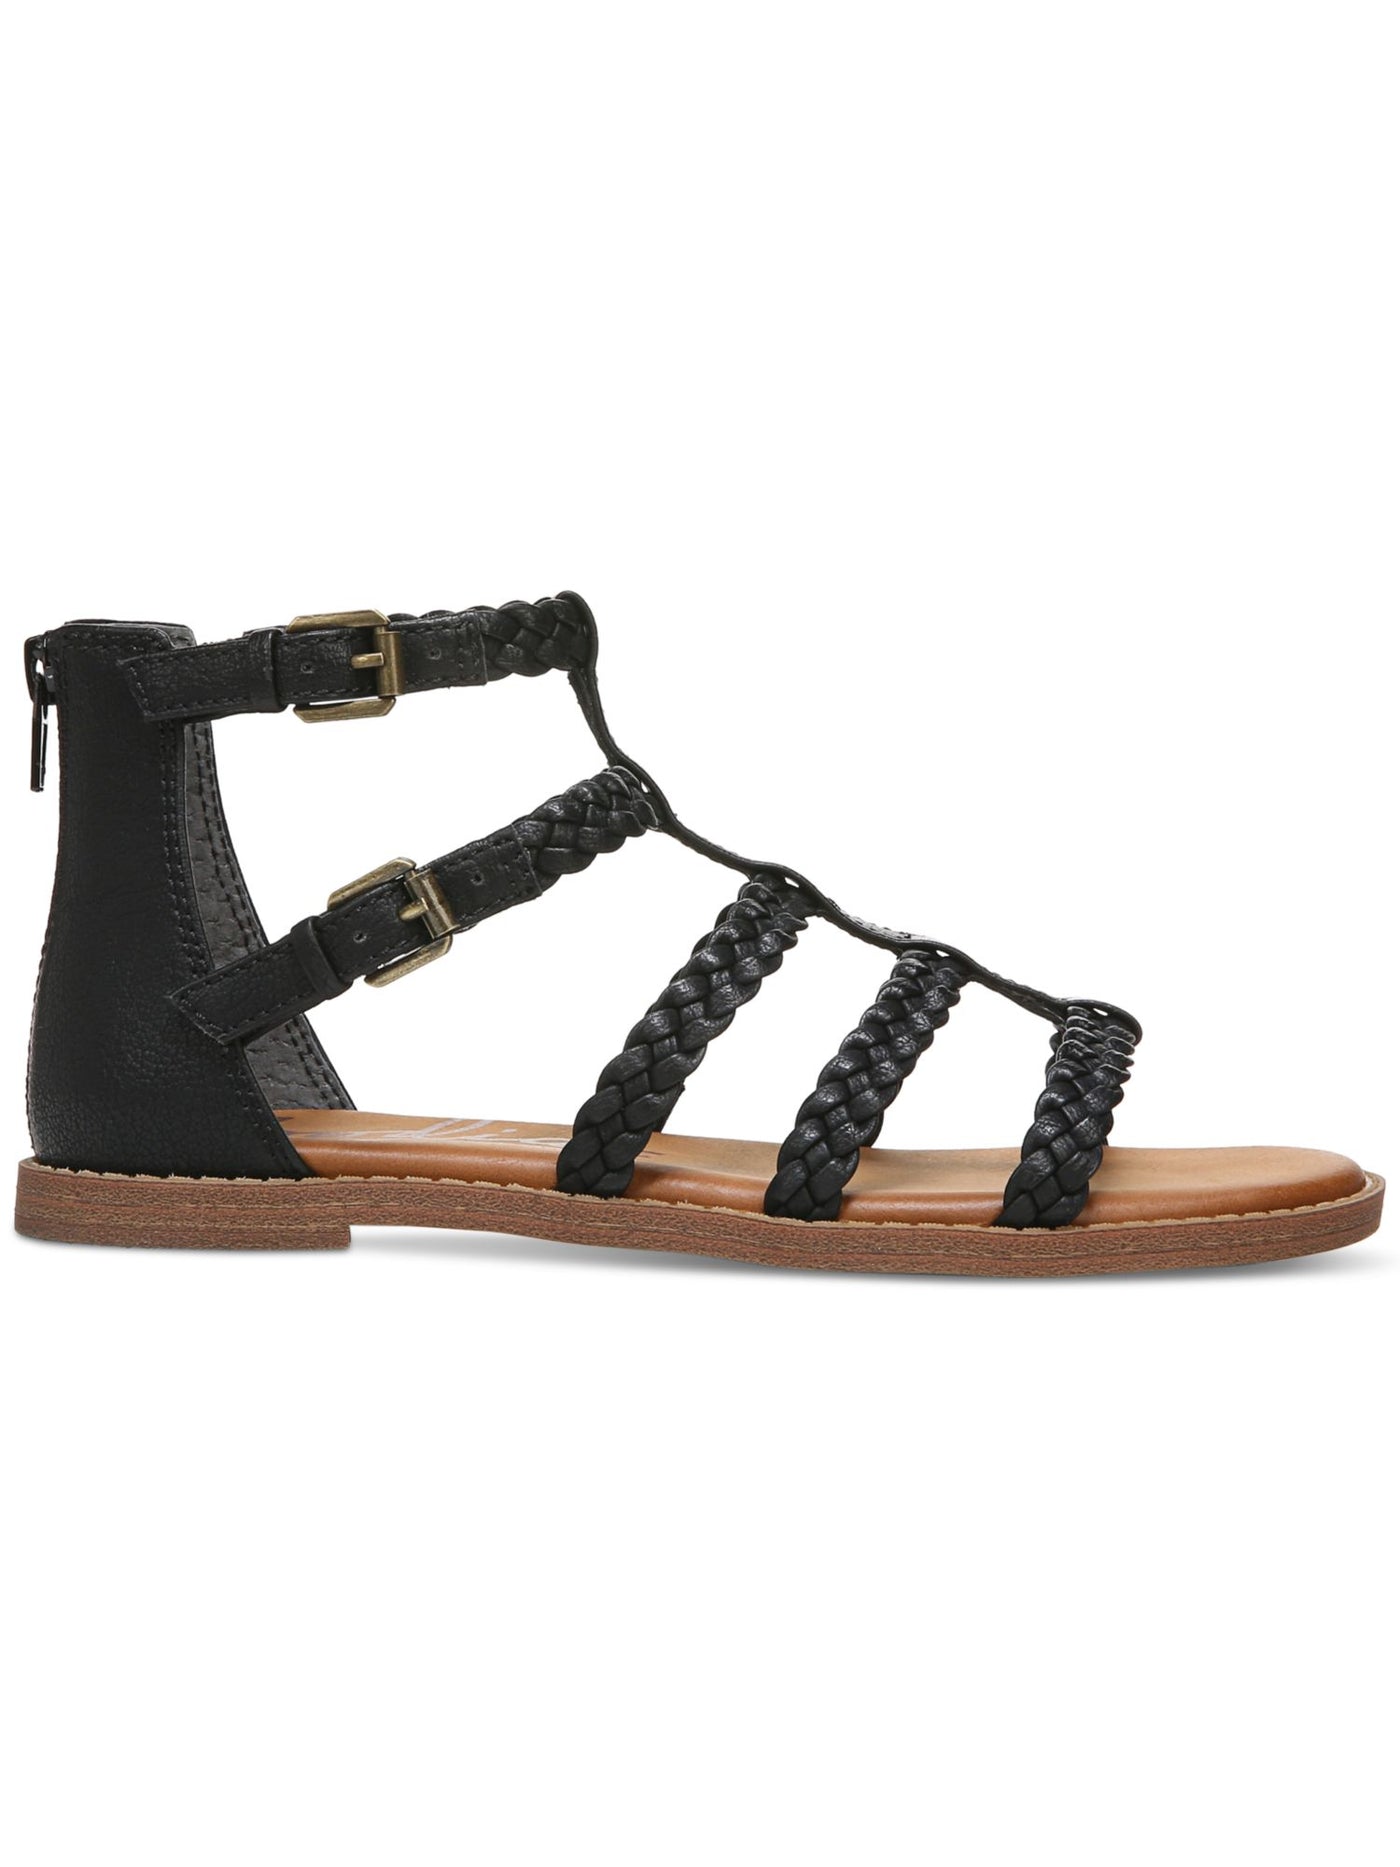 ZODIAC Womens Black Woven Buckle Accent Cushioned Camelia Round Toe Zip-Up Gladiator Sandals Shoes 6 M